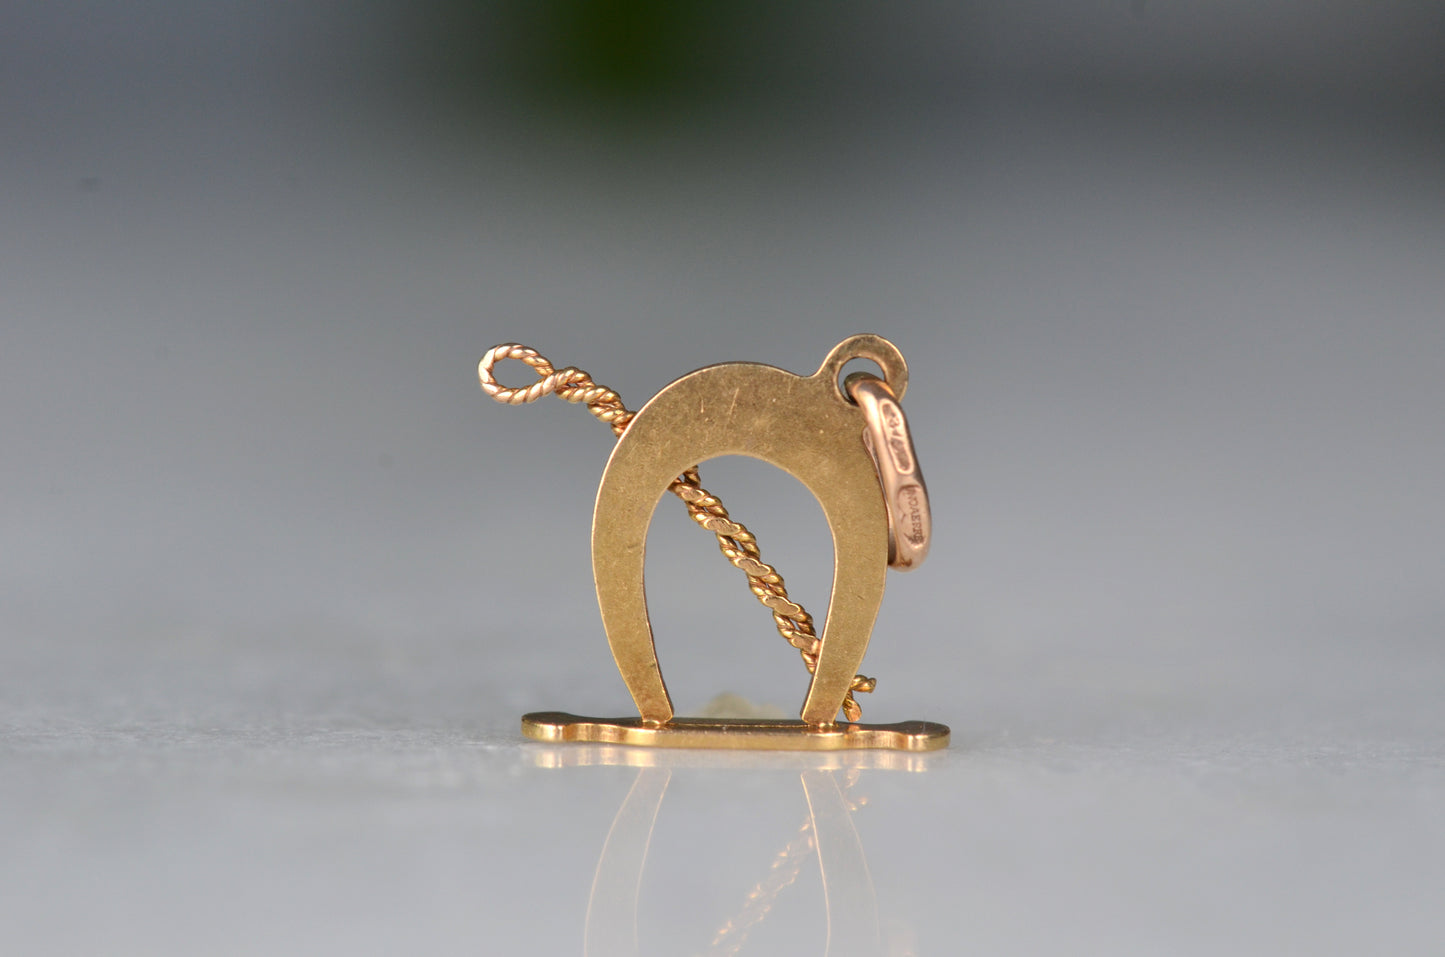 Detailed Vintage Horseshoe and Crop Charm